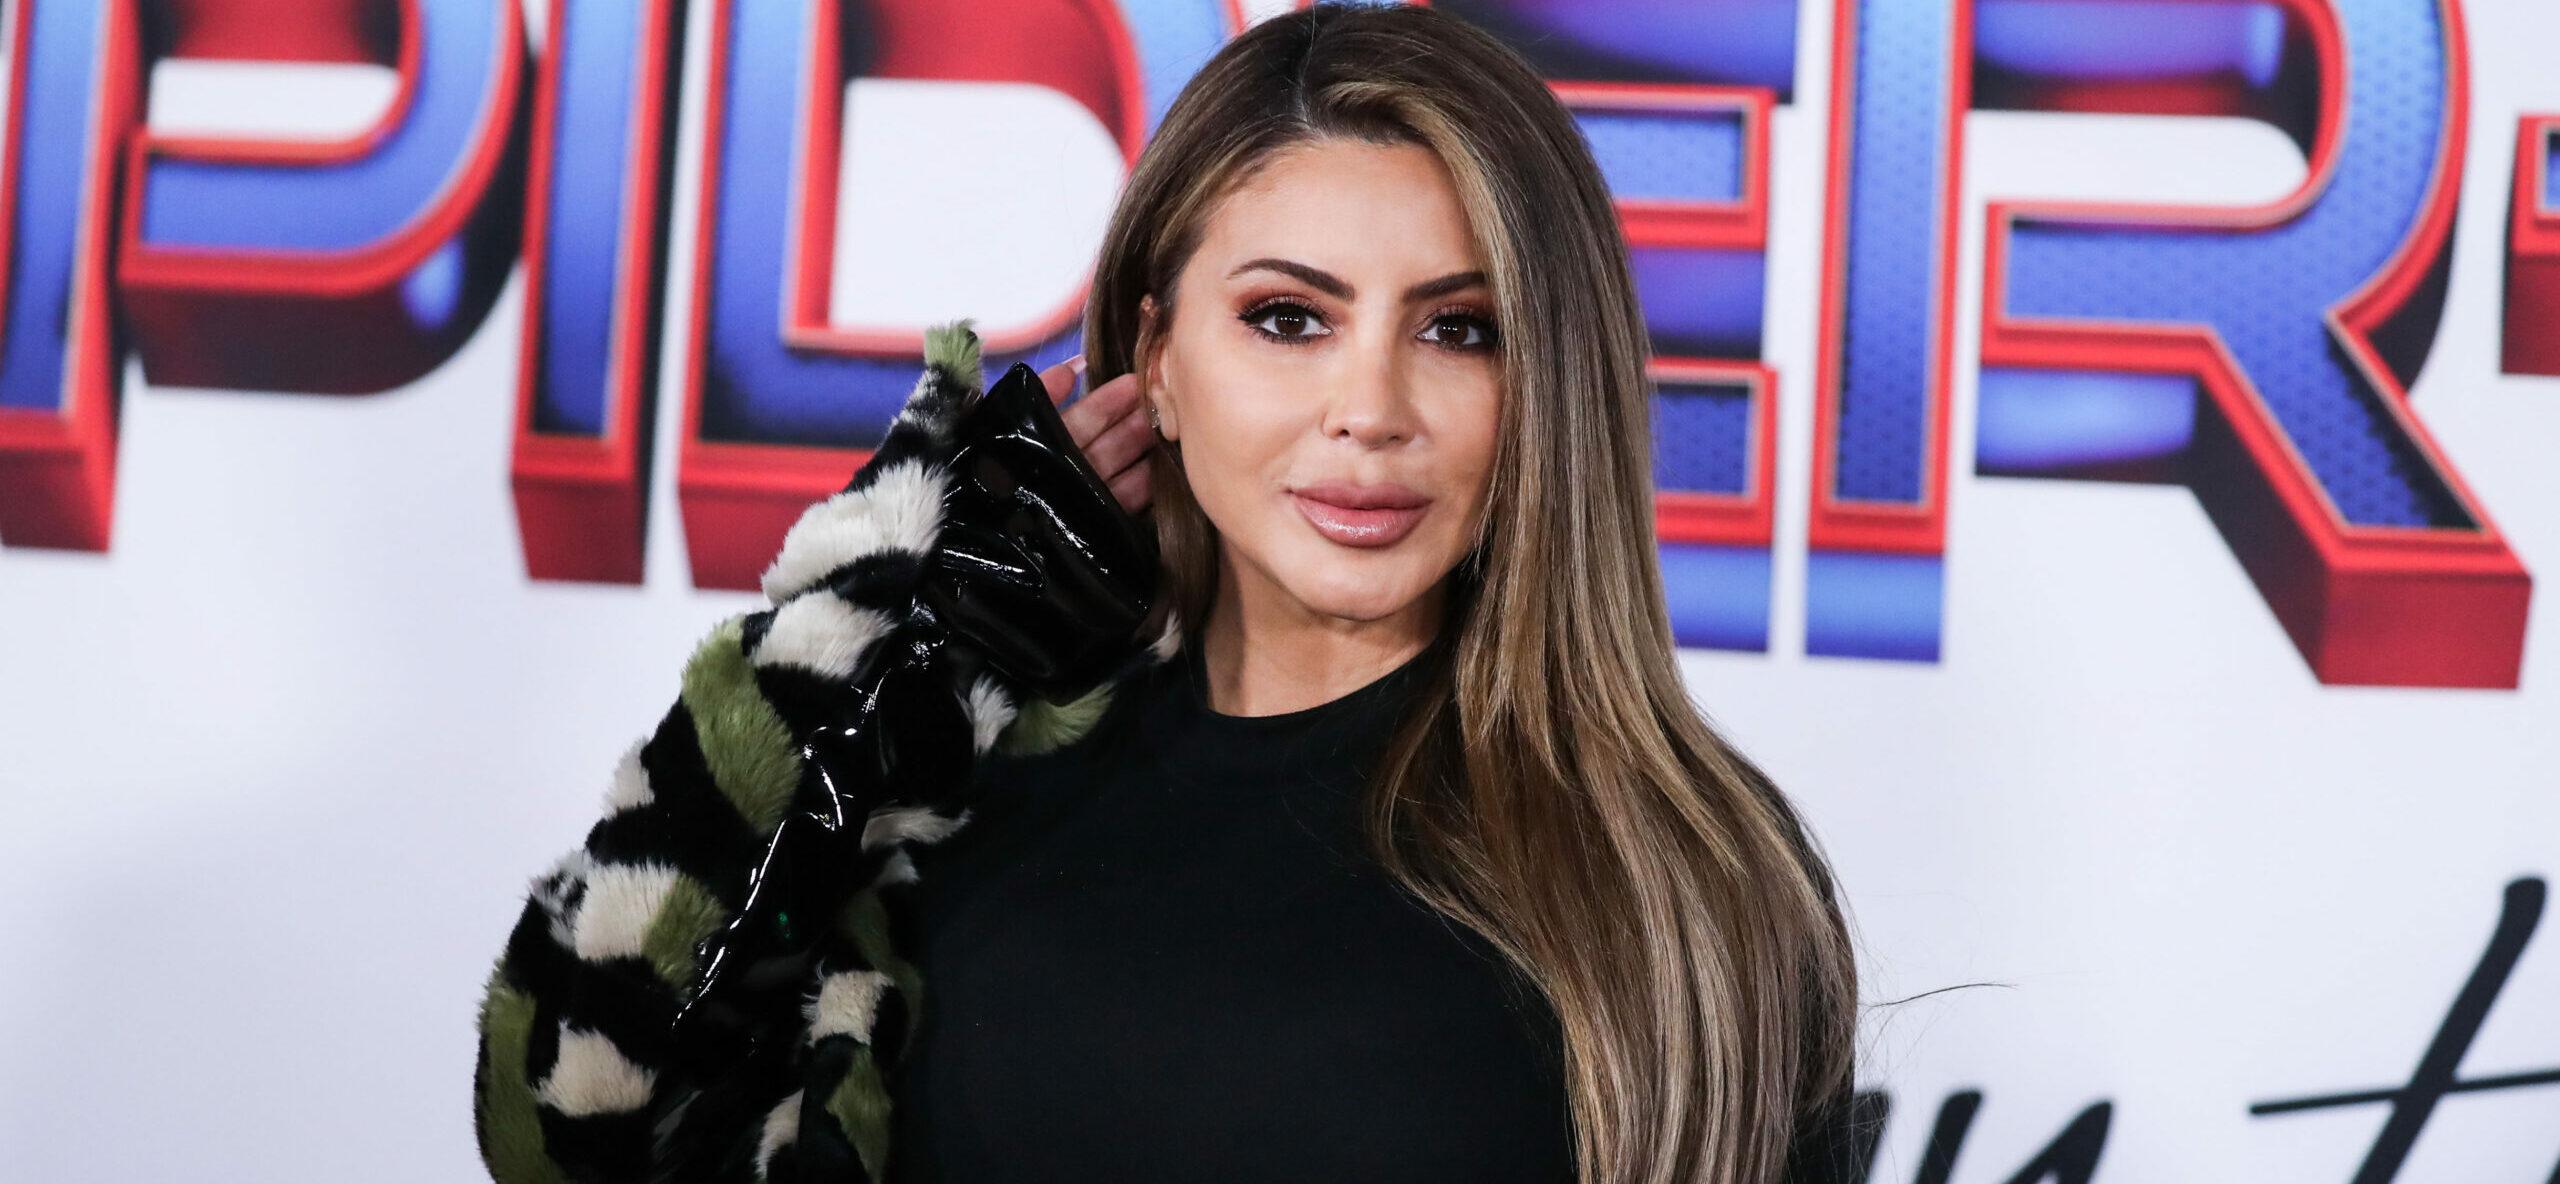 Larsa Pippen Seen Loved Up With Michael Jordan’s Son Marcus At Music Festival